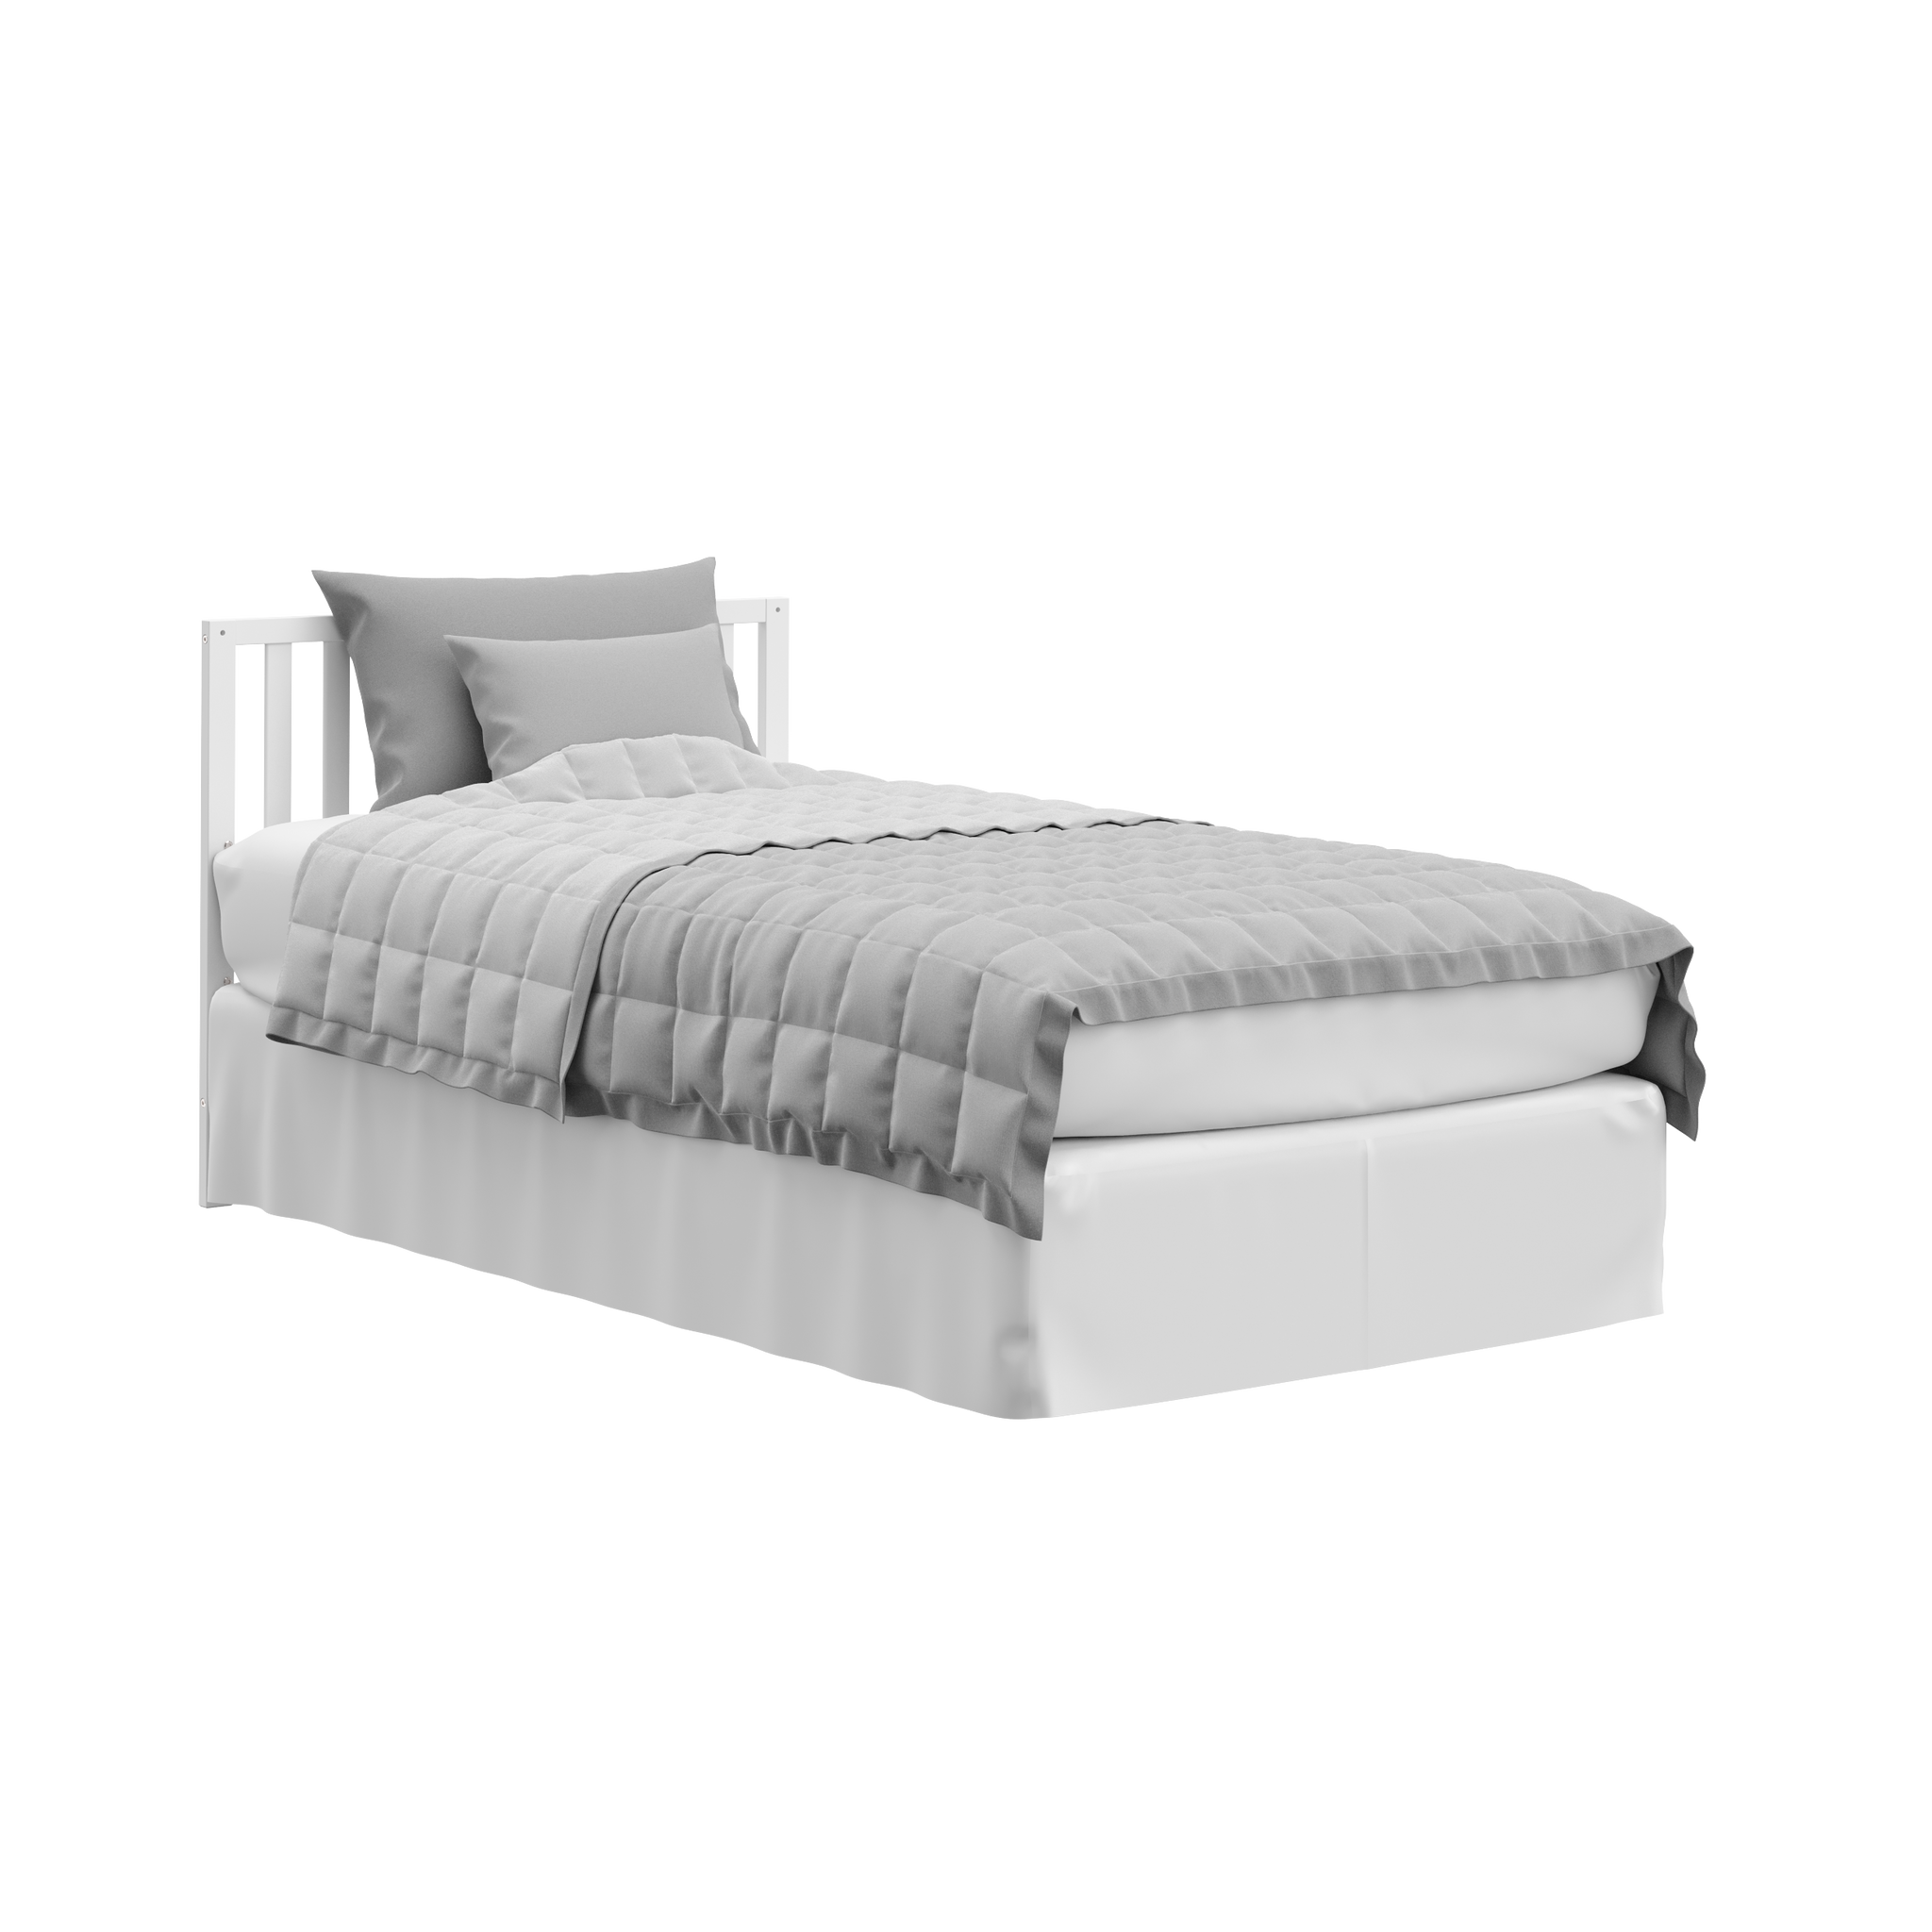 white crib in full-size bed conversion with headboard only